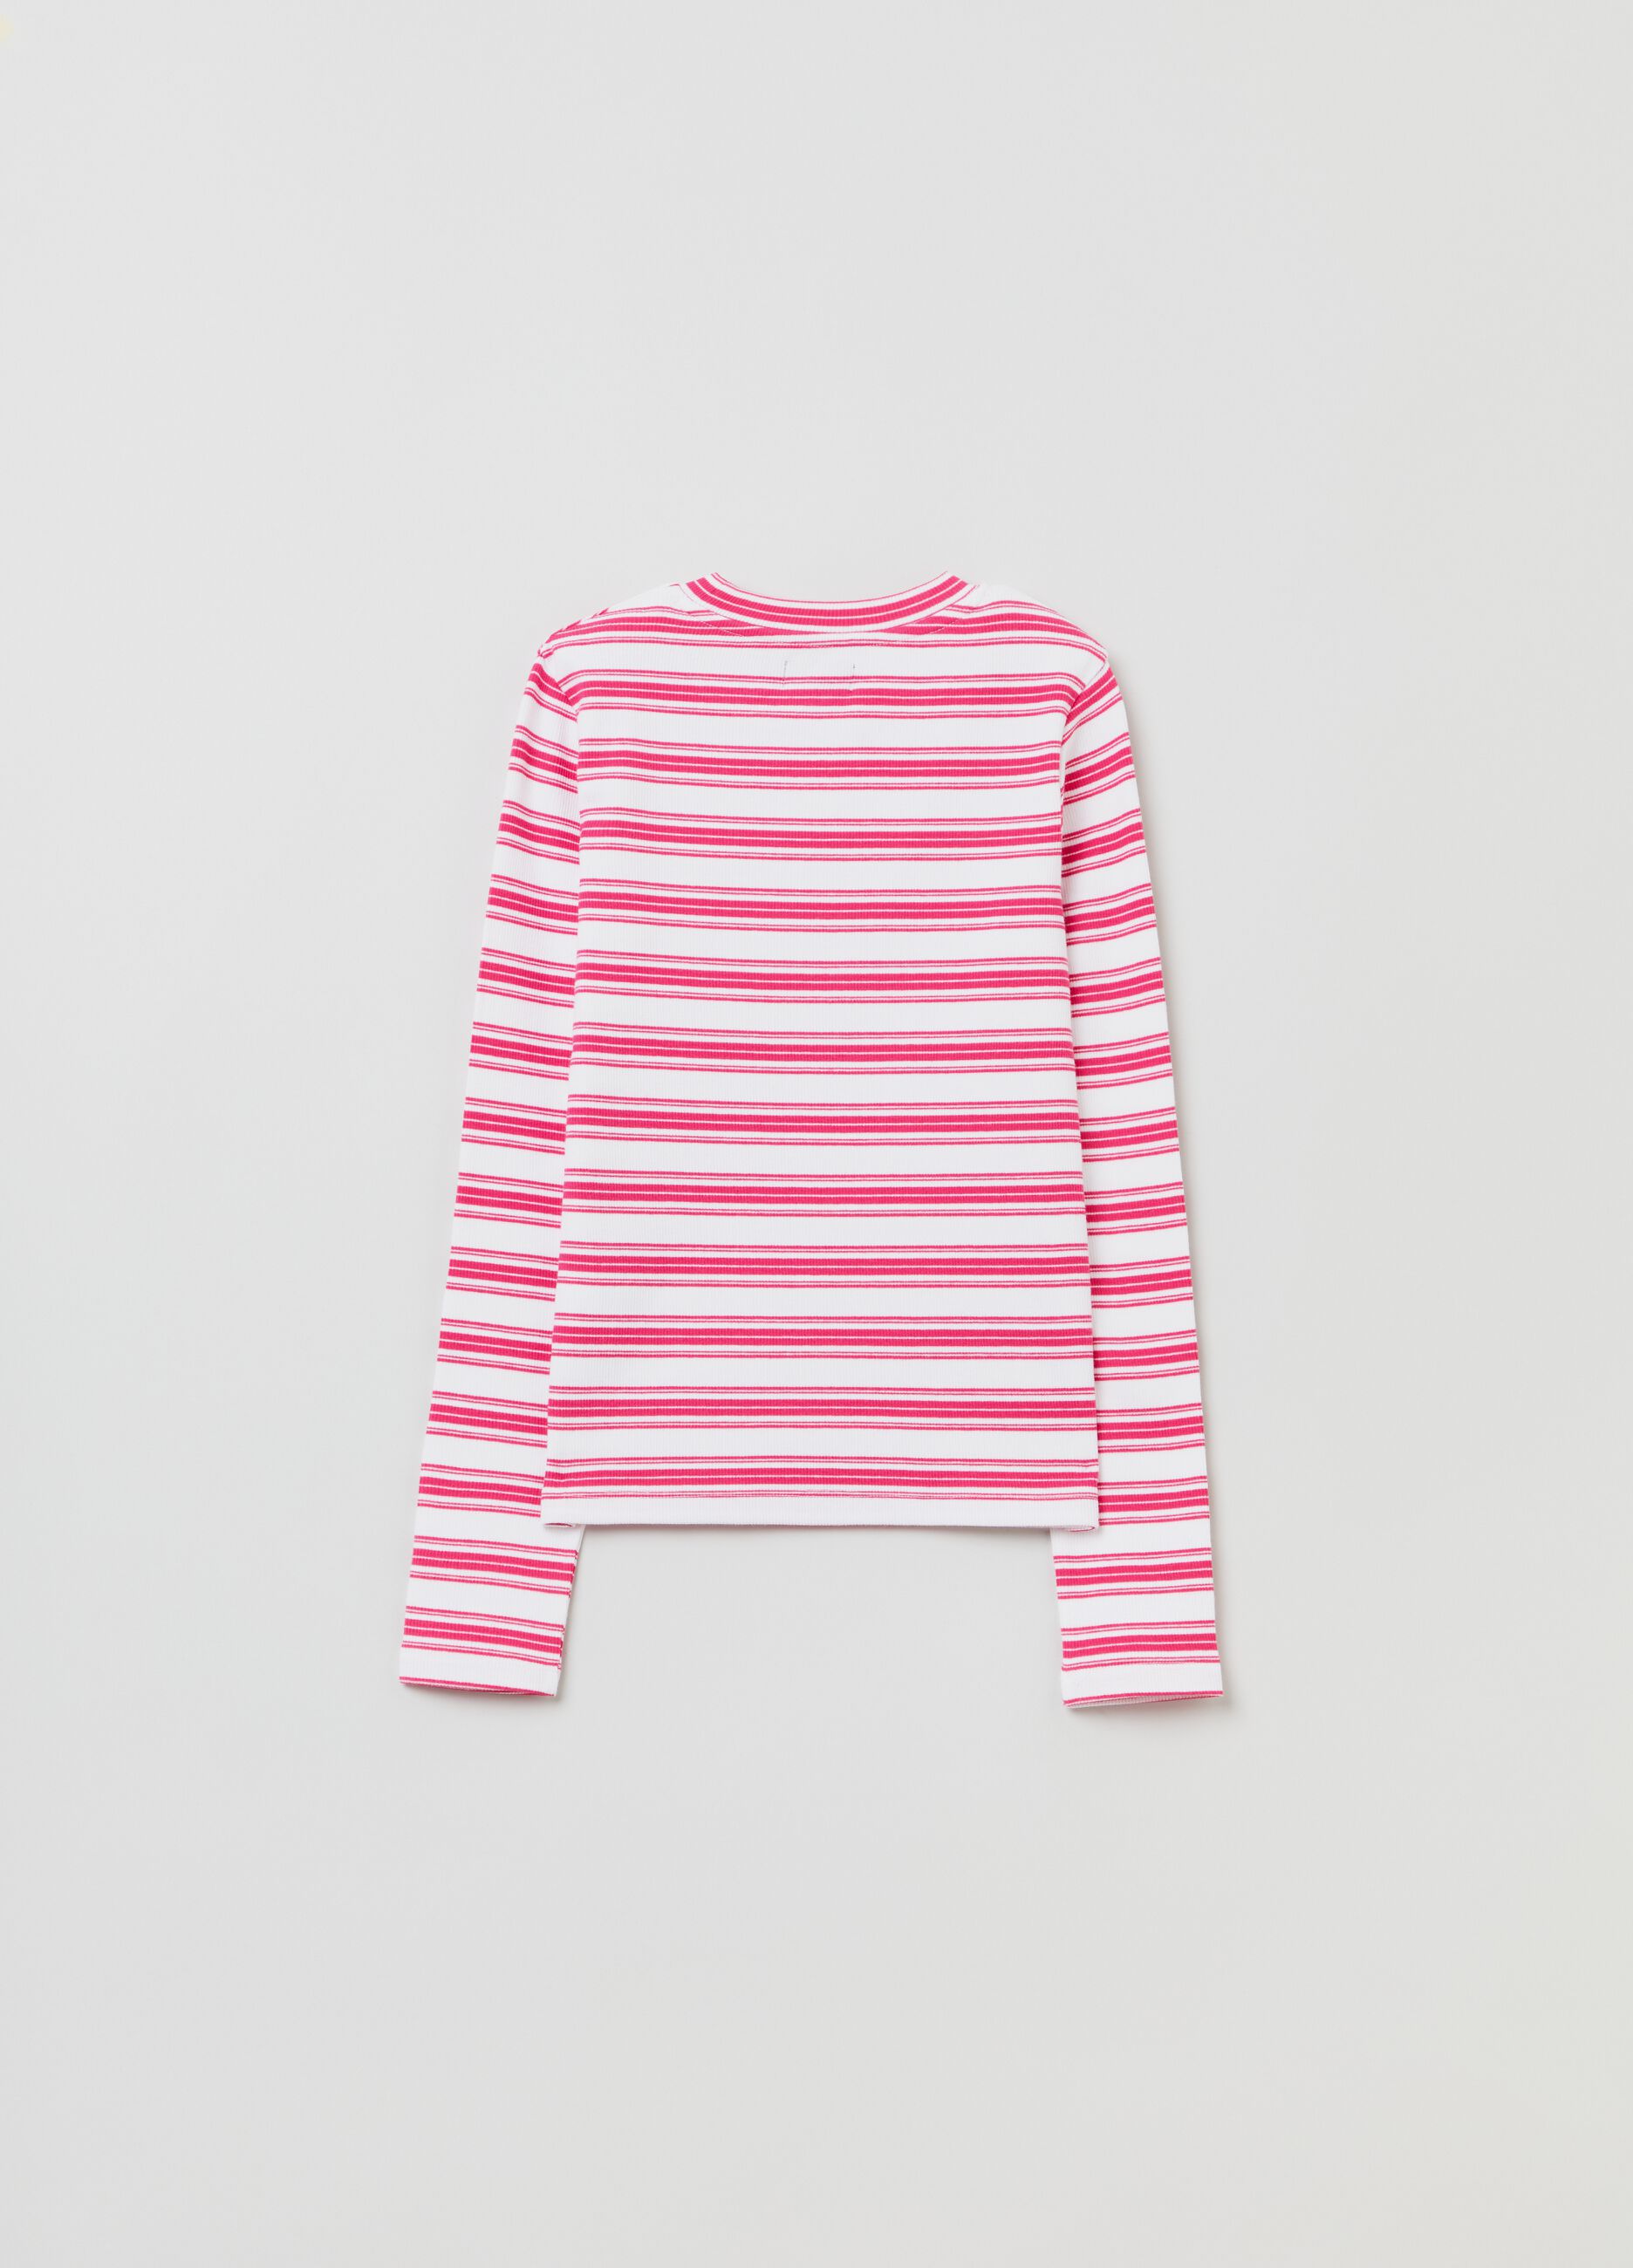 Stretch cotton T-shirt with striped pattern